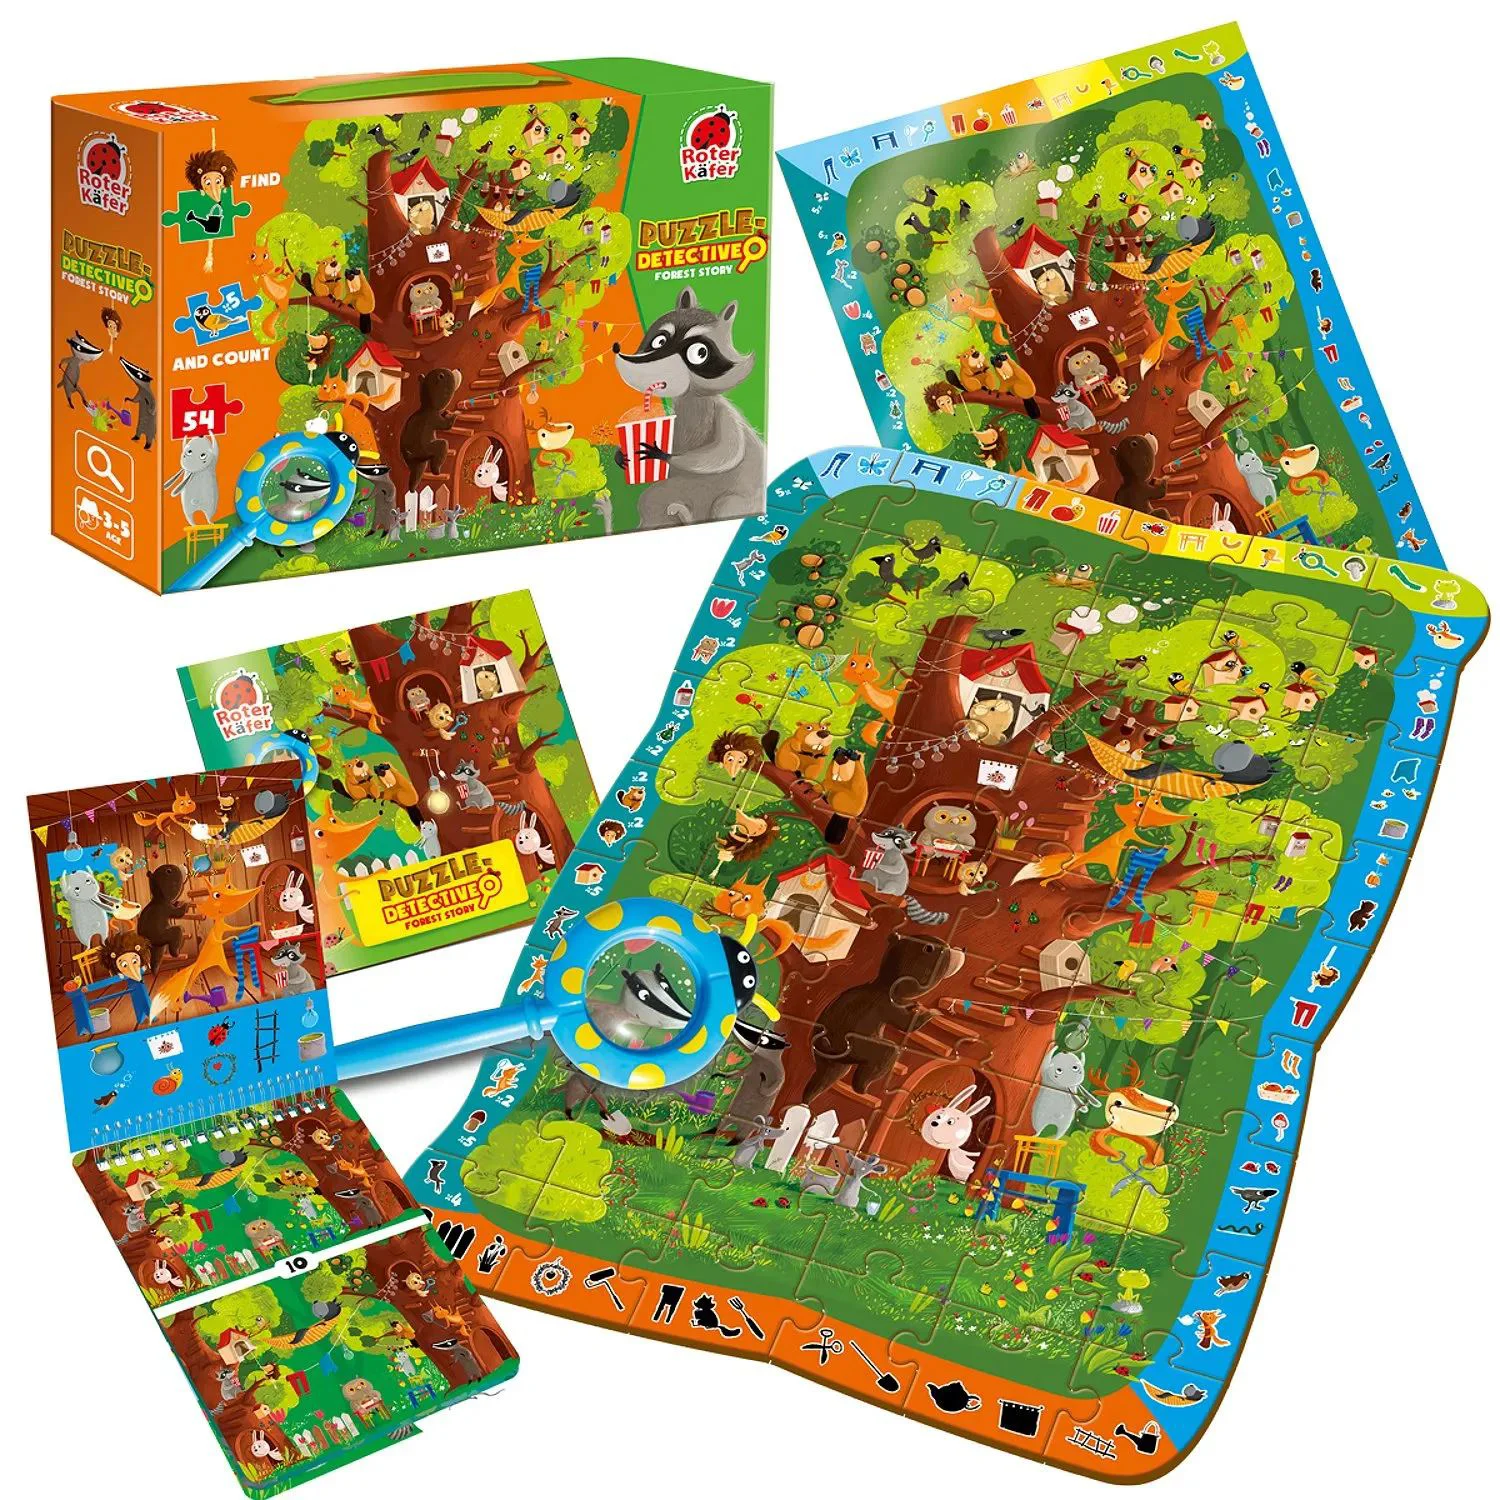 Puzzle-detective Roter Kafer Forest story